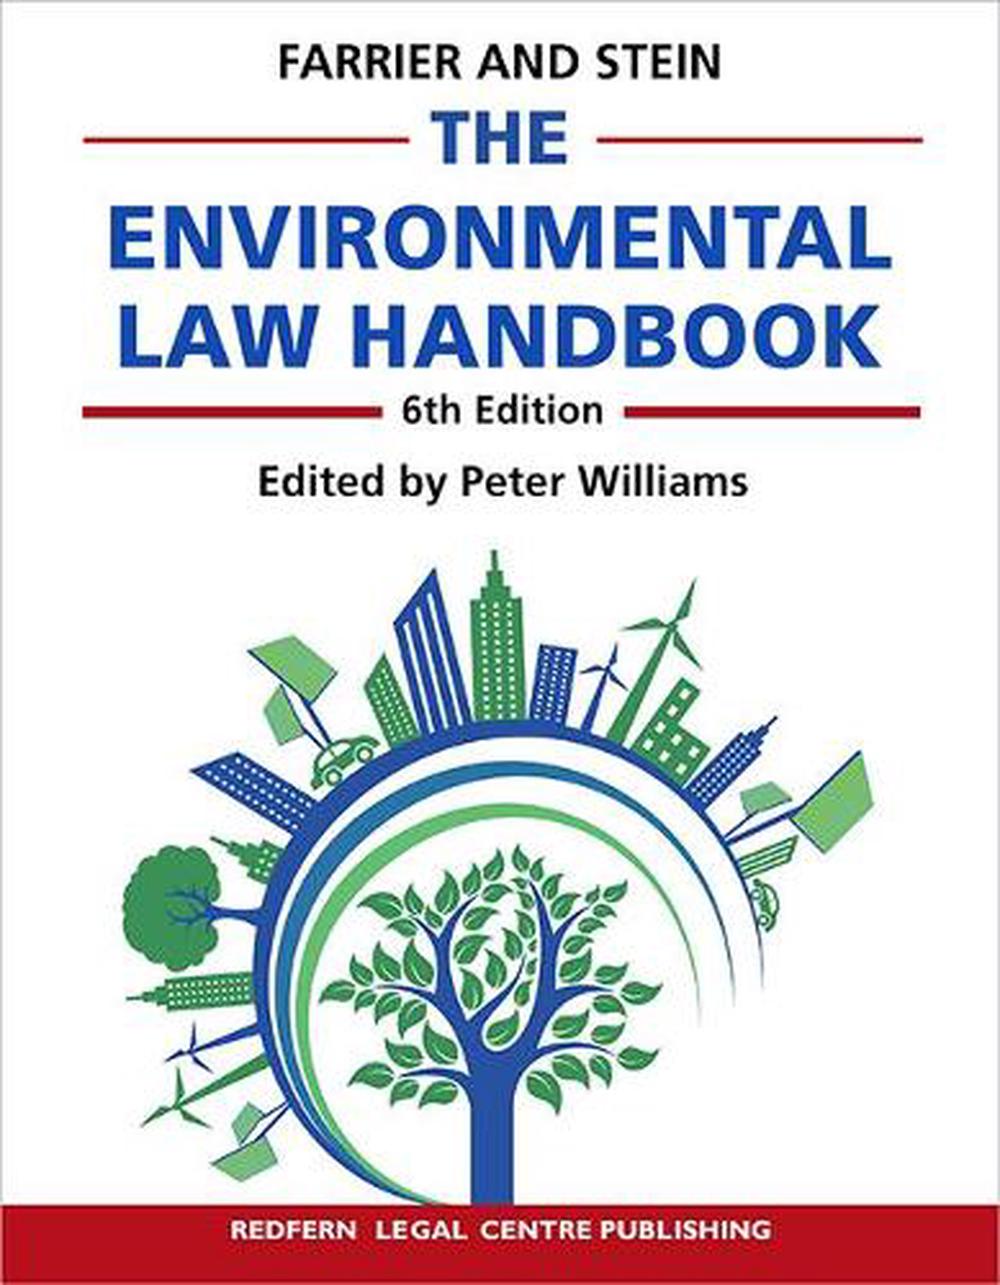 research topic for environmental law